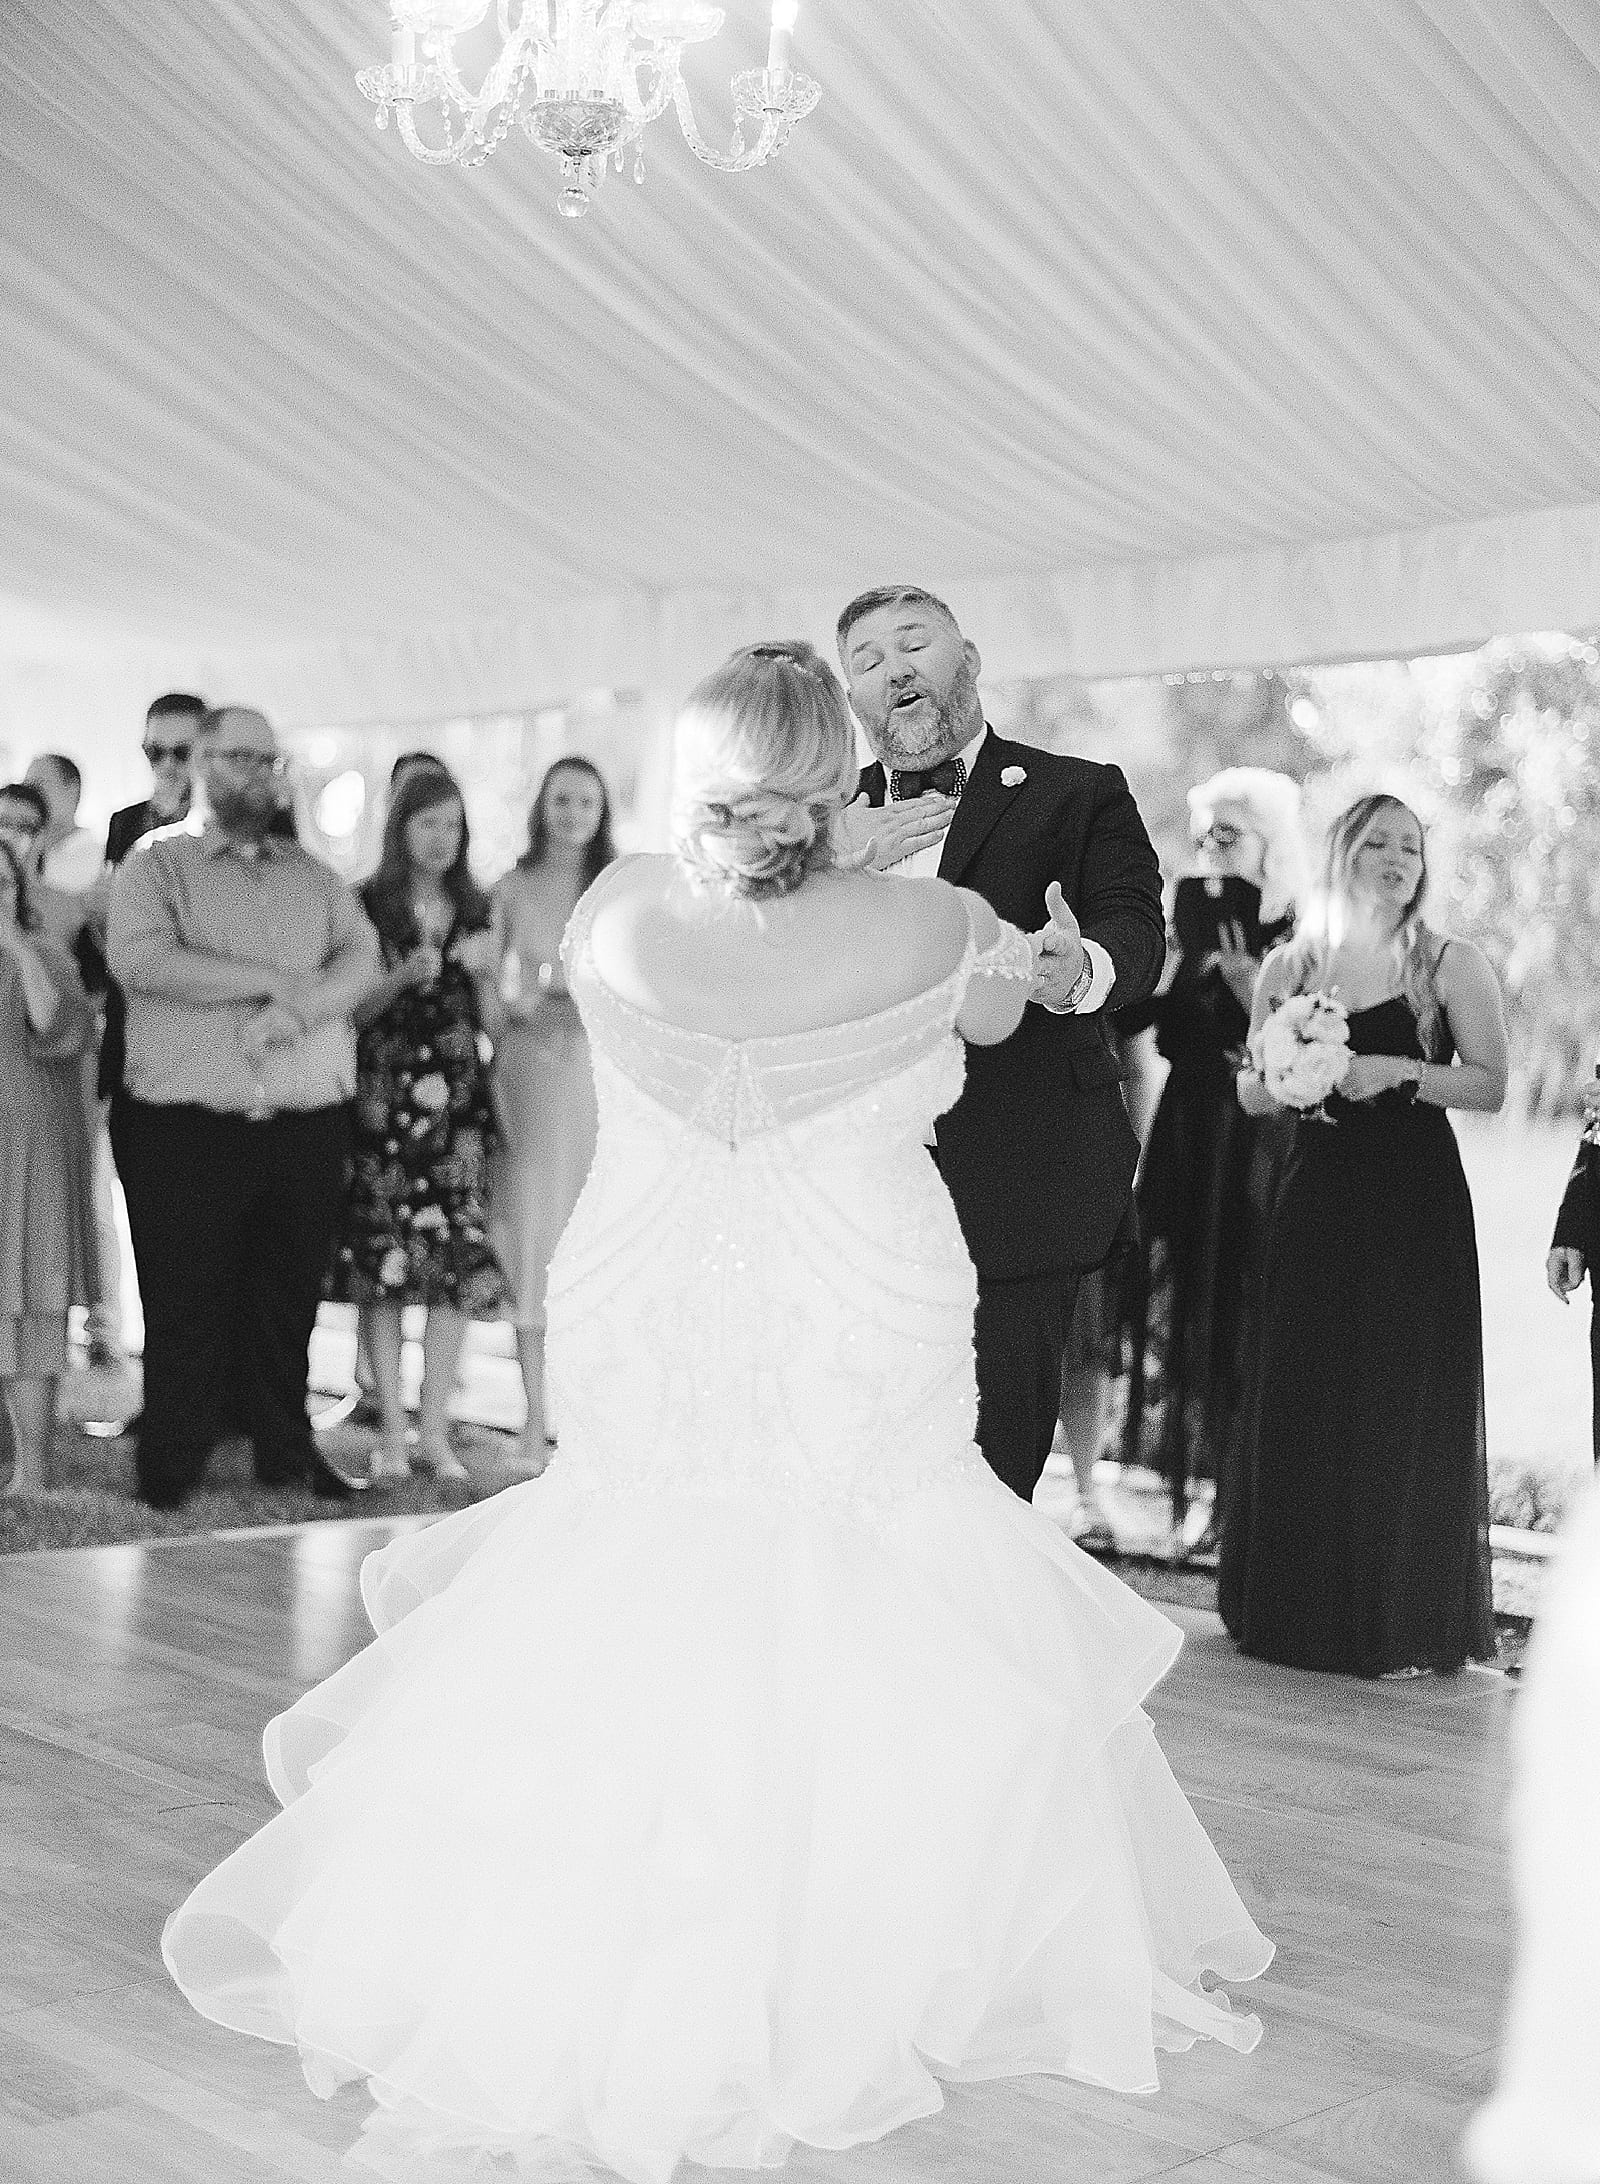 Orlando Wedding Photographer Bride and Groom First Dance Black and White Photo